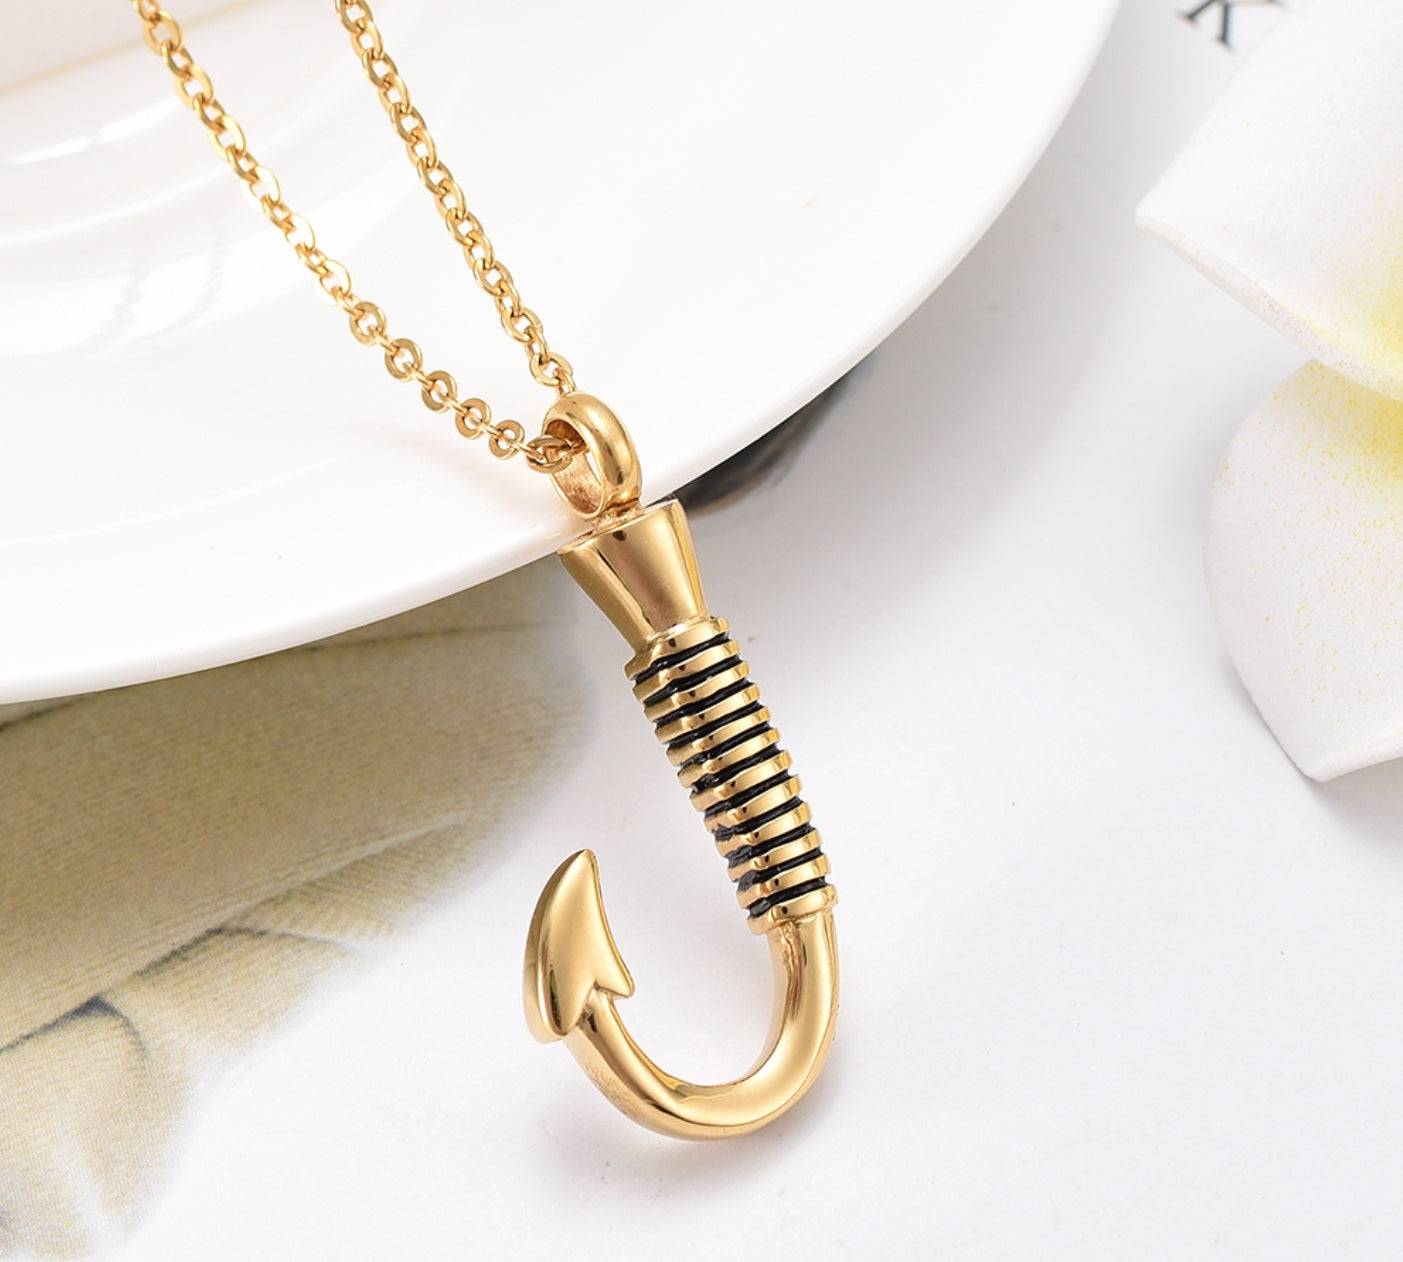 Fish Hook Urn Cremation Jewelry - Ash Necklace - Cherished Emblems Gold